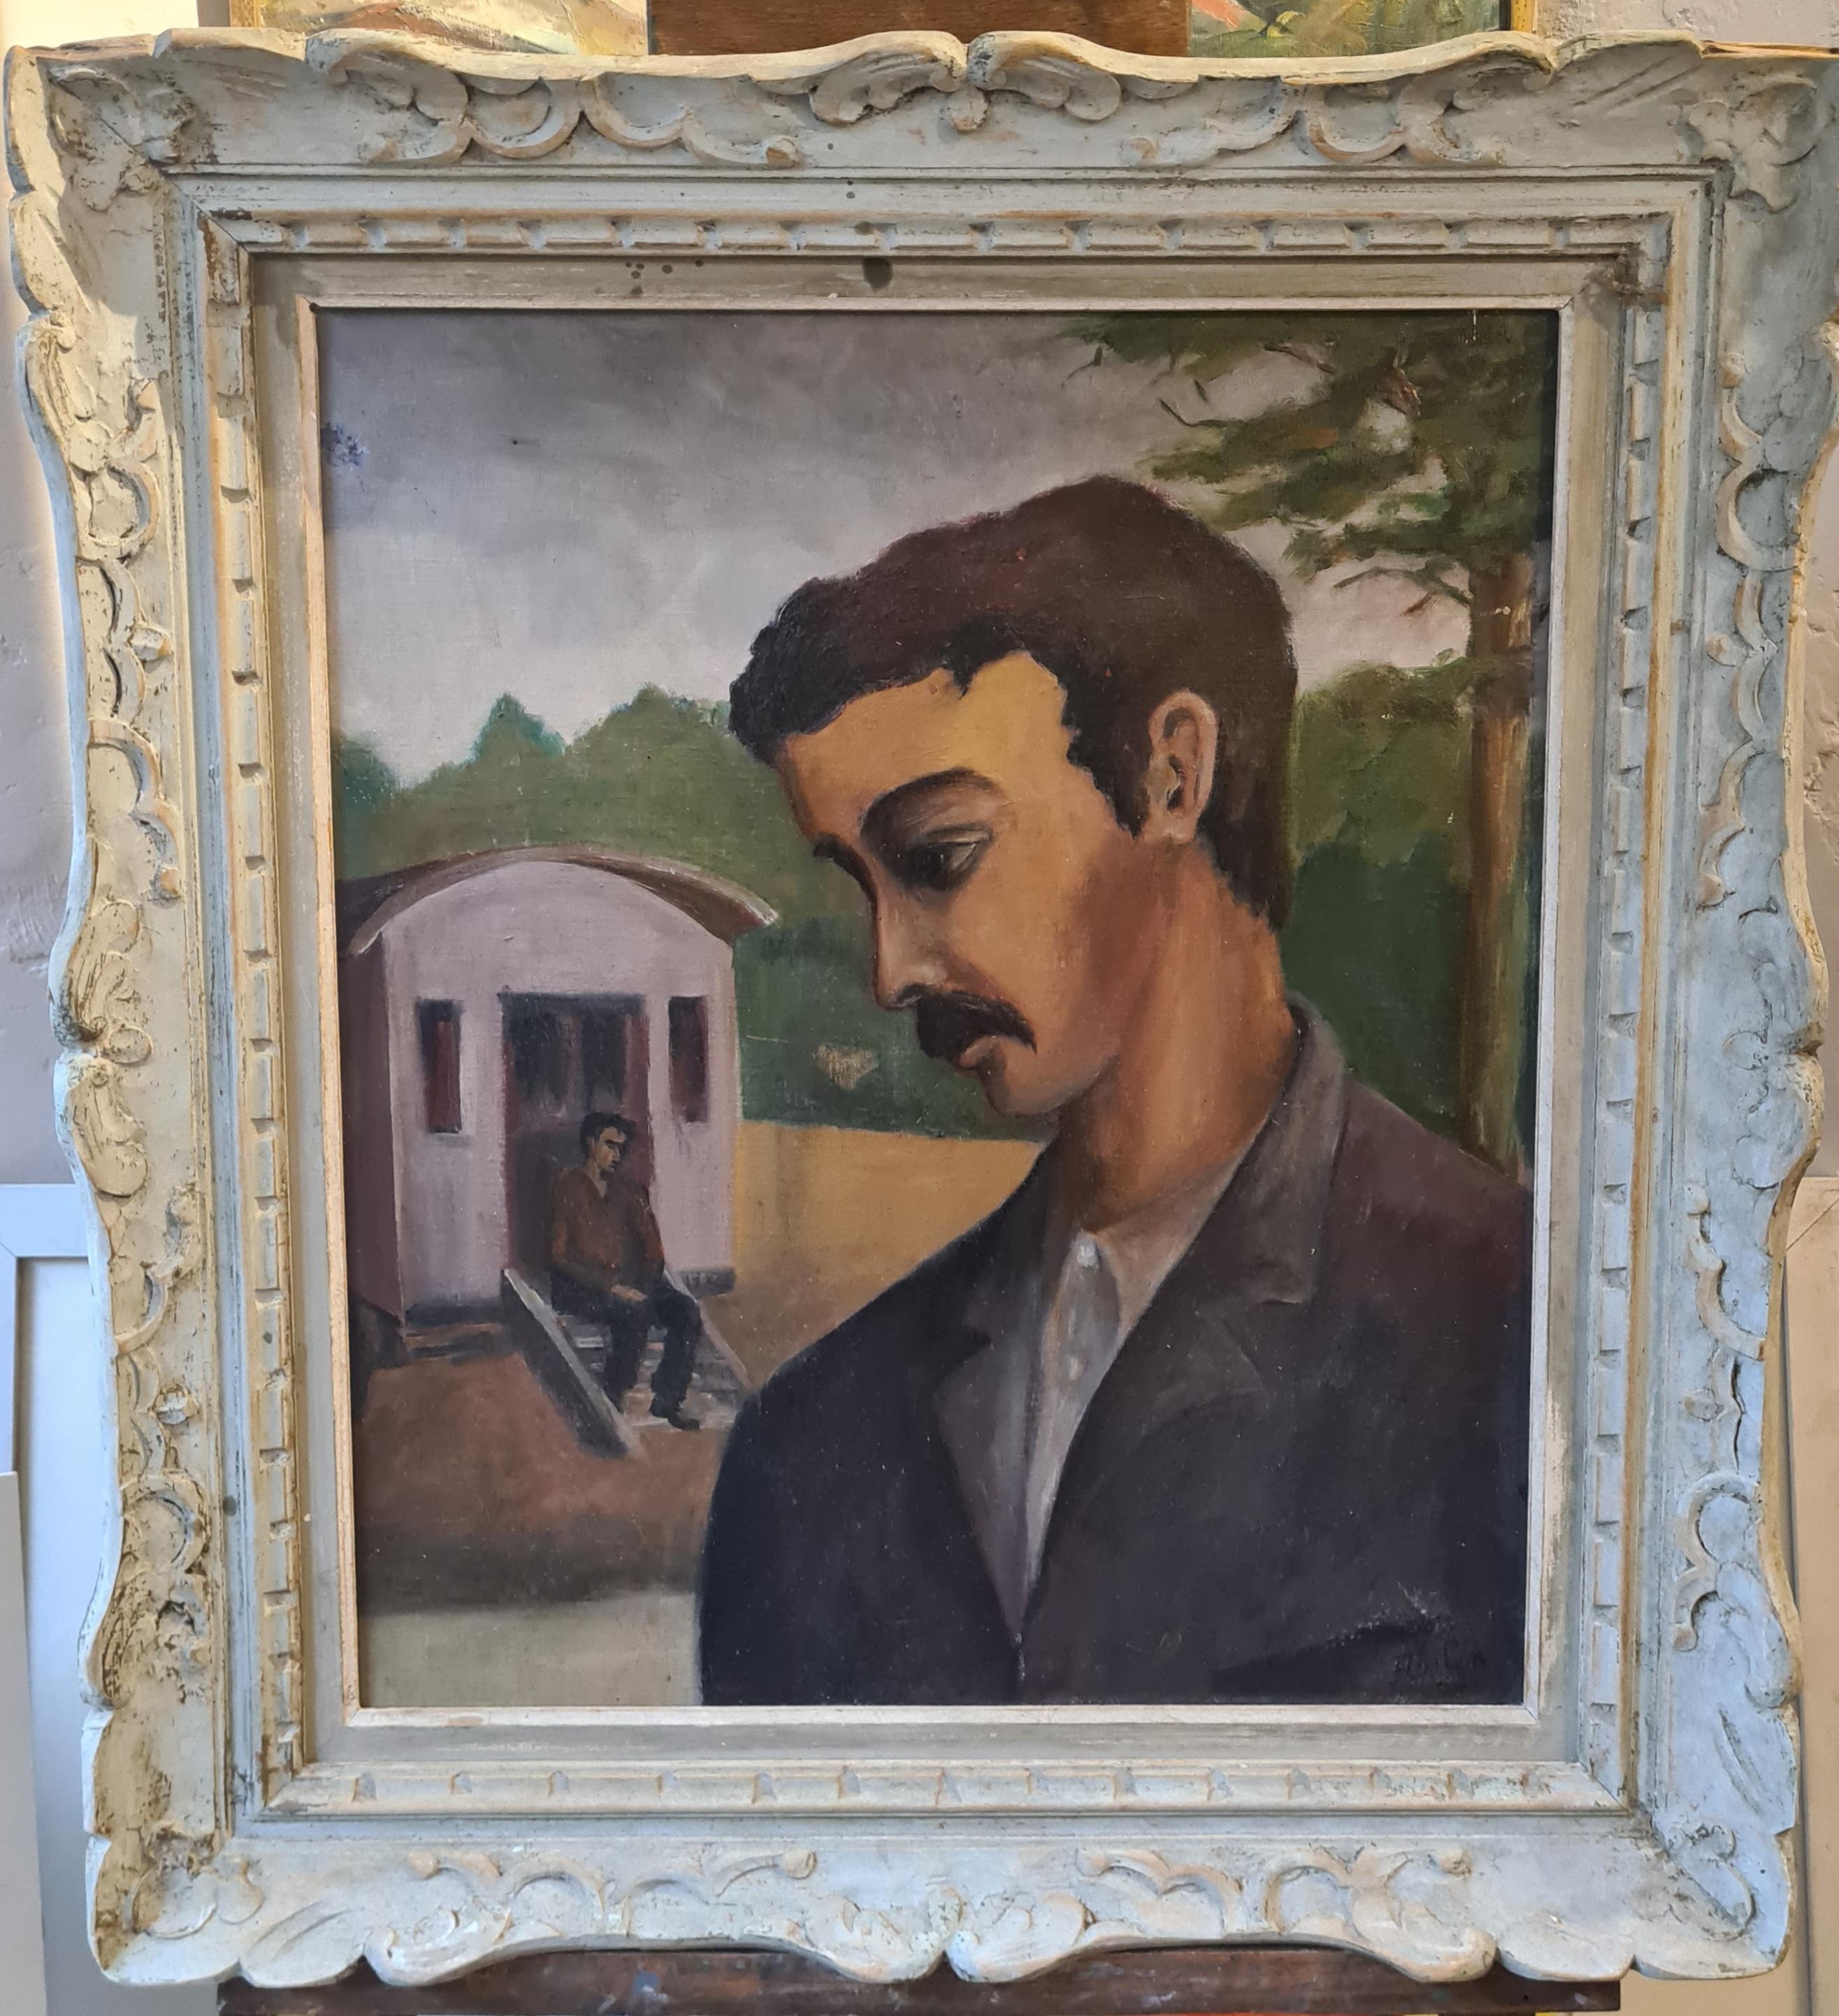 Figurative Expressionist portrait and scene of a travellers gypsy caravan. The painting is signed bottom right, Fayo (?) but further research is necessary for an attribution. Presented in a fine chip carved Montparnasse frame.

Provenance: from a